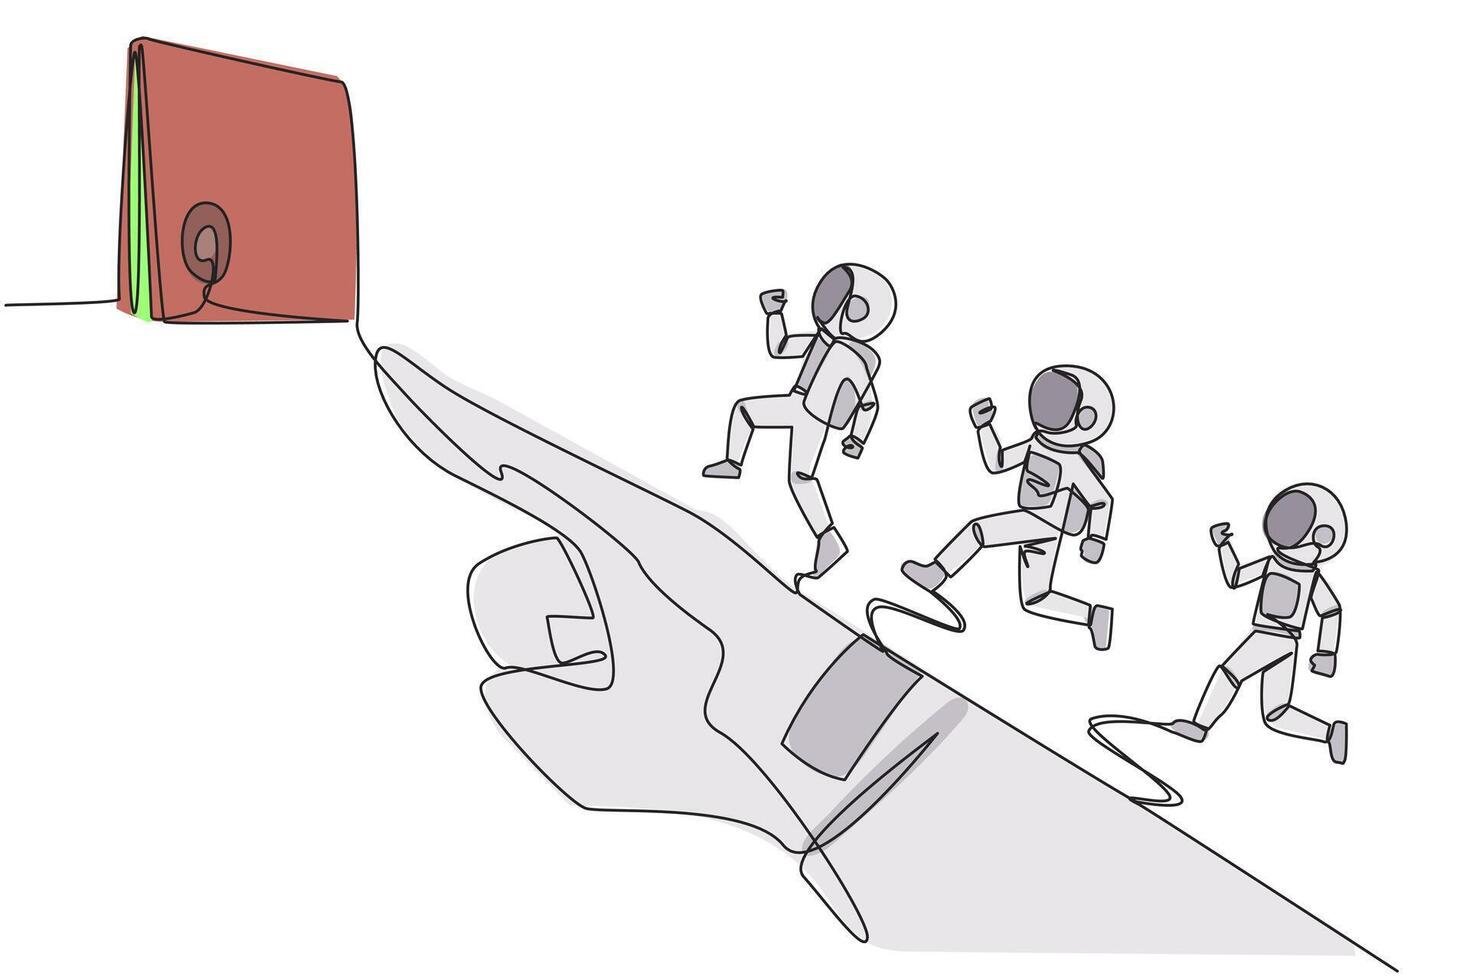 Continuous one line drawing 3 astronauts running on giant astronaut hand whose finger is pointing at round target board. Focused teamwork towards up arrow. Single line draw design vector illustration